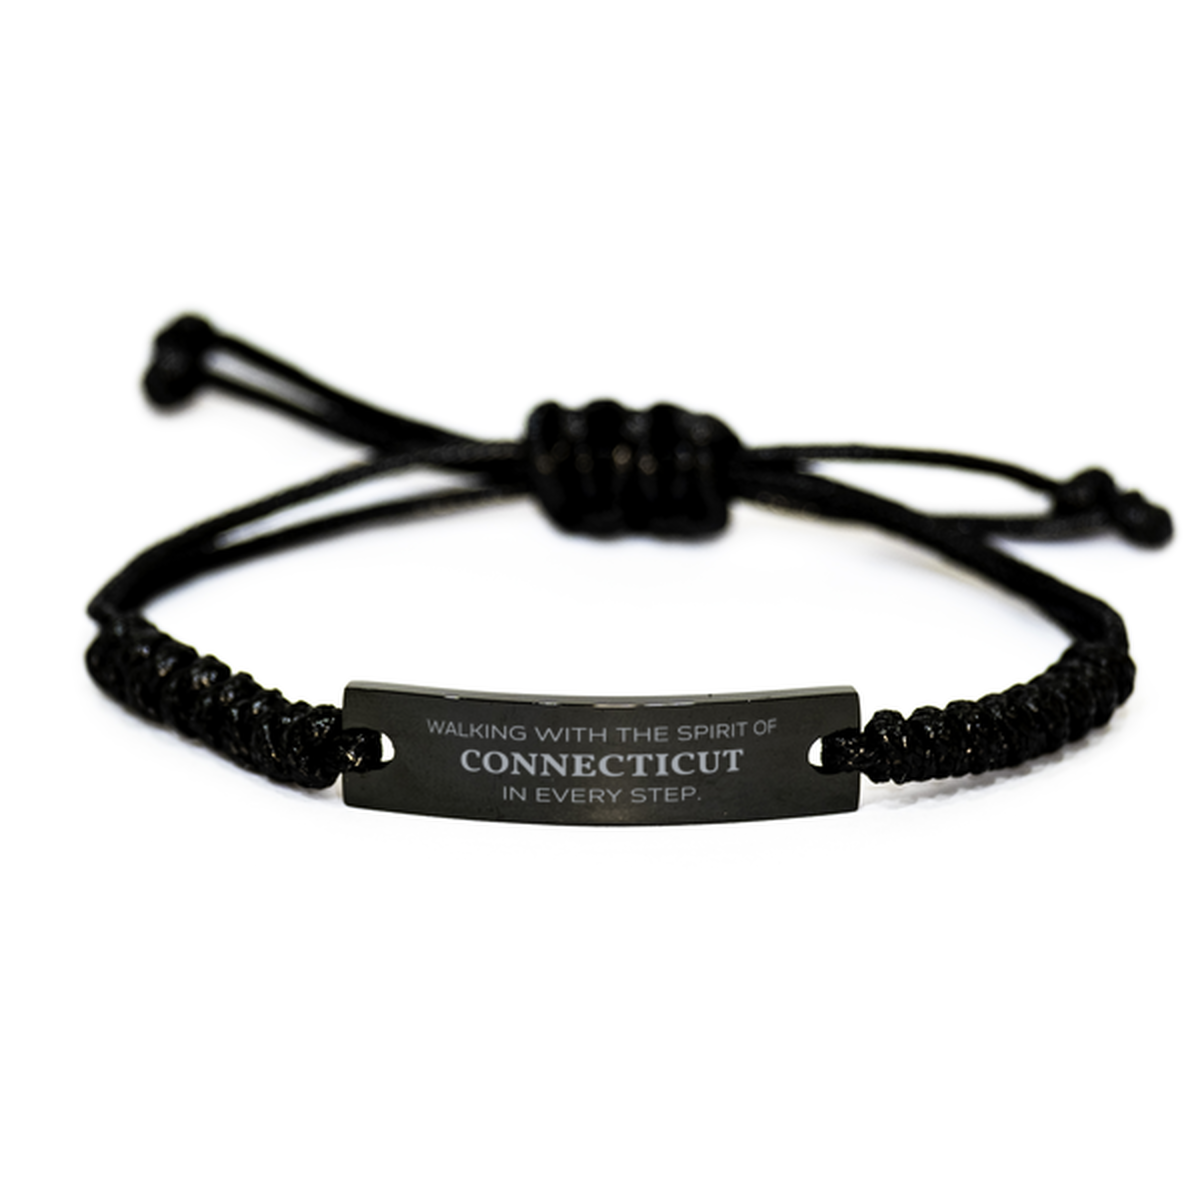 Connecticut Gifts, Walking with the spirit, Love Connecticut Birthday Christmas Black Rope Bracelet For Connecticut People, Men, Women, Friends